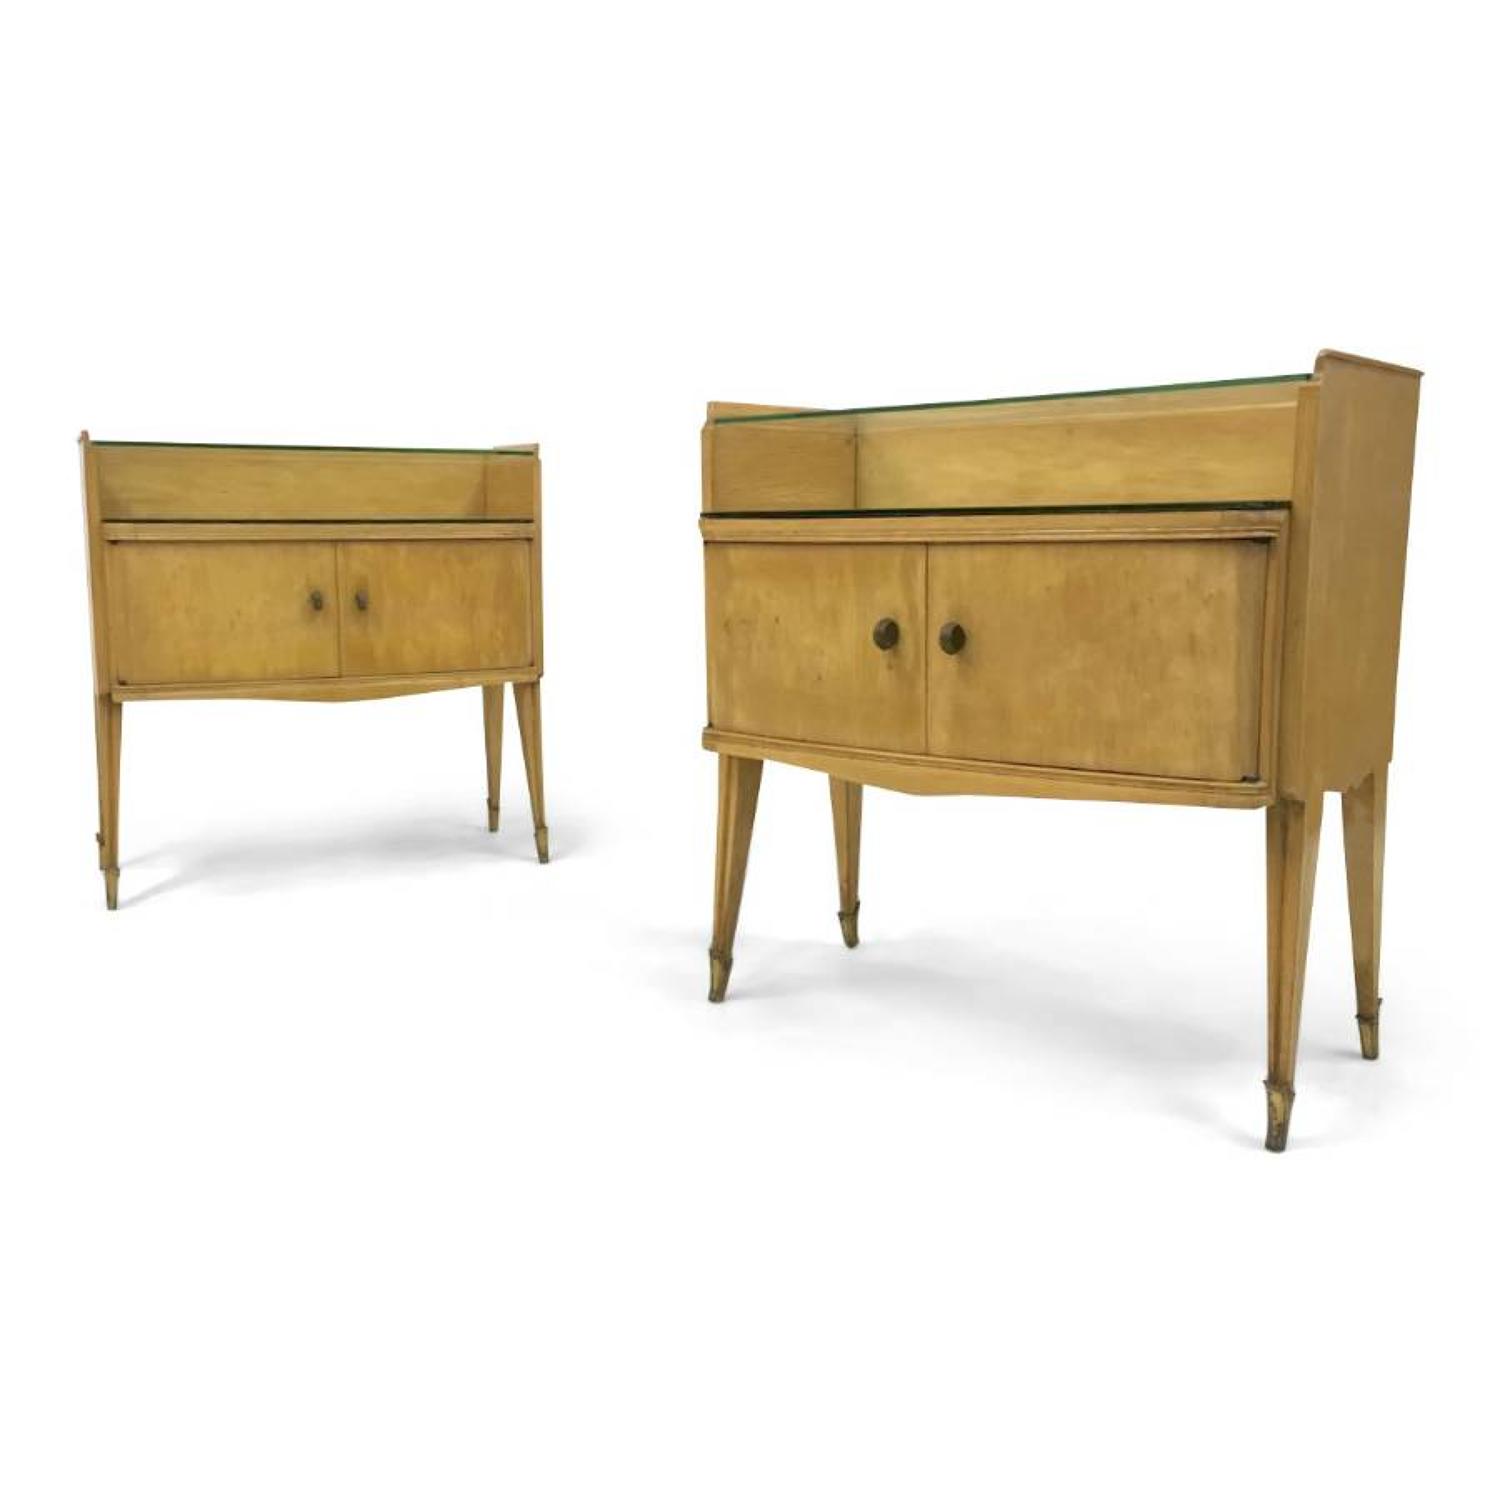 A pair of 1950s Italian bedside tables